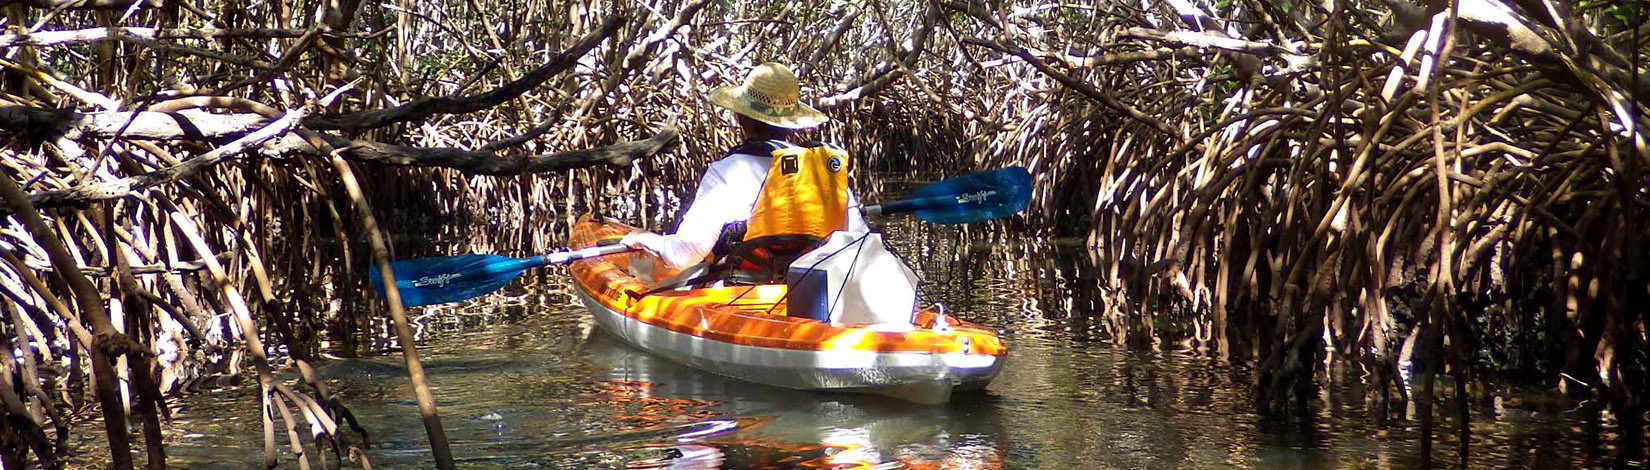 photo of a woman kayaking in a wetland